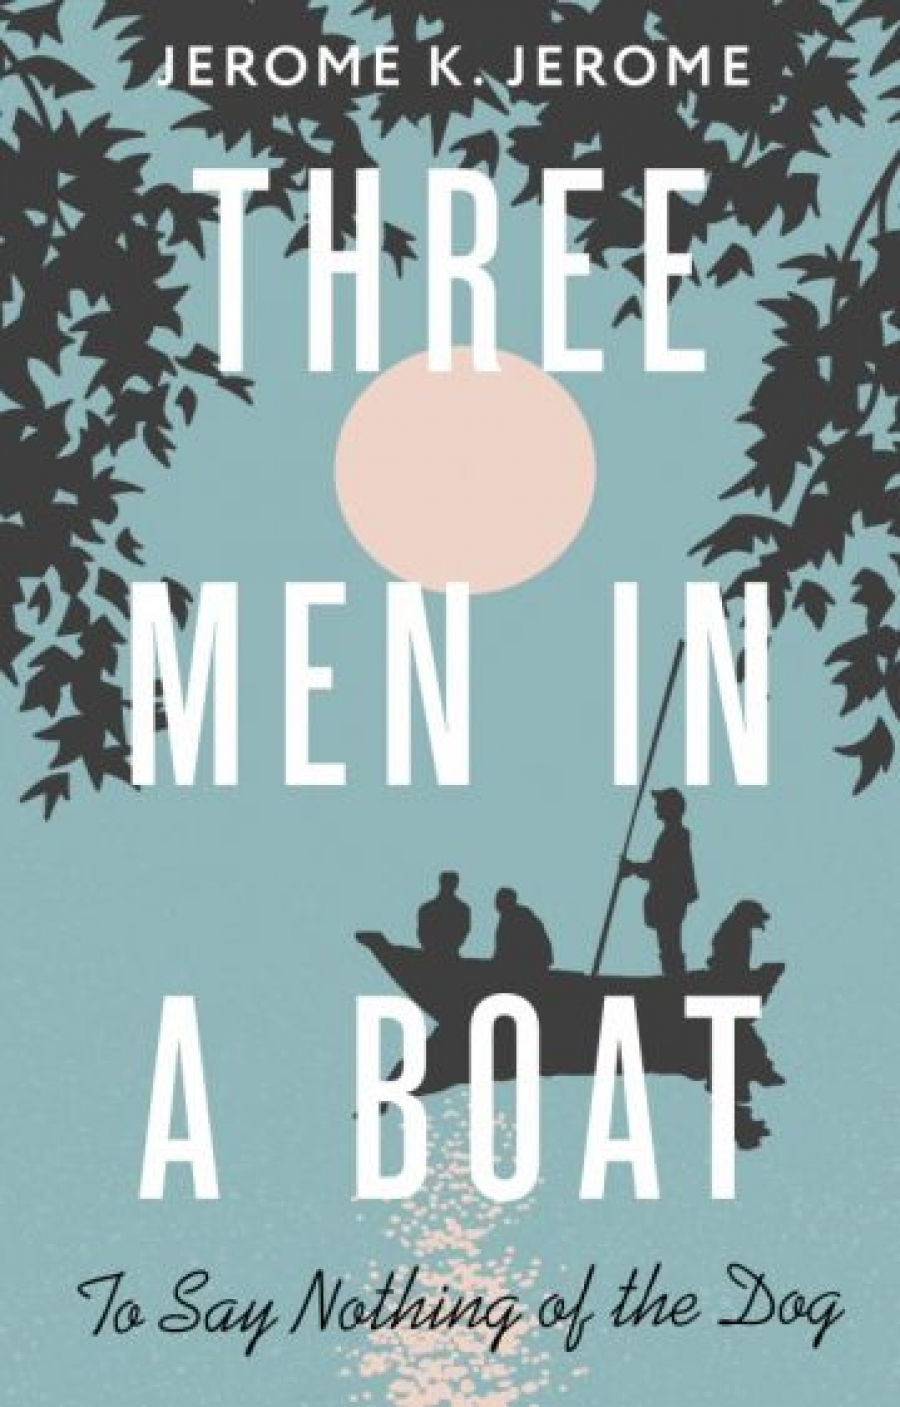 Jerome Jerome K. Three Men in a Boat (To say Nothing of the Dog) 